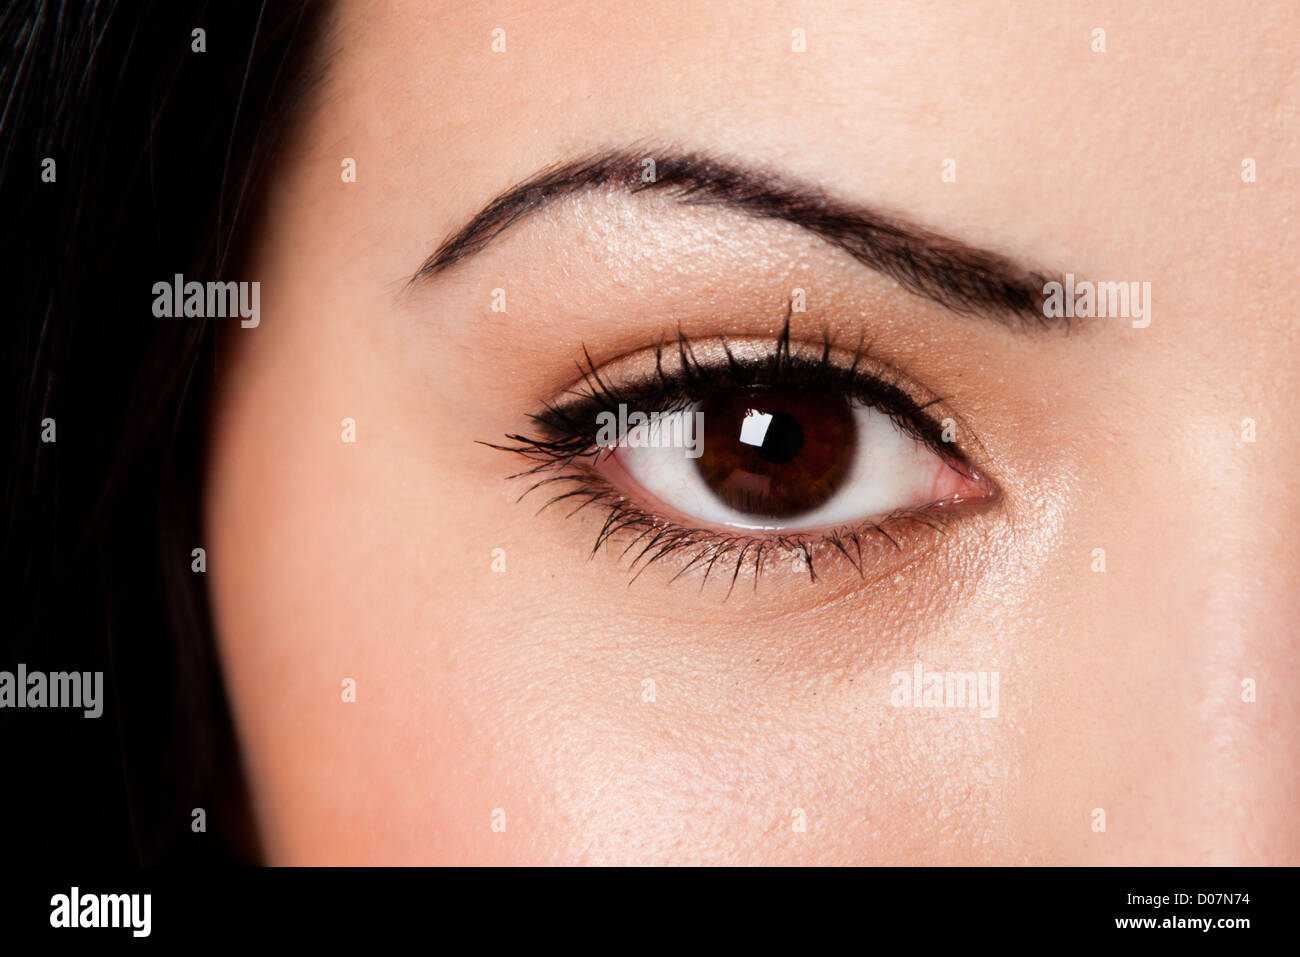 Beautiful female eyebrow and brown eye with lashes on fair skin. Stock Photo